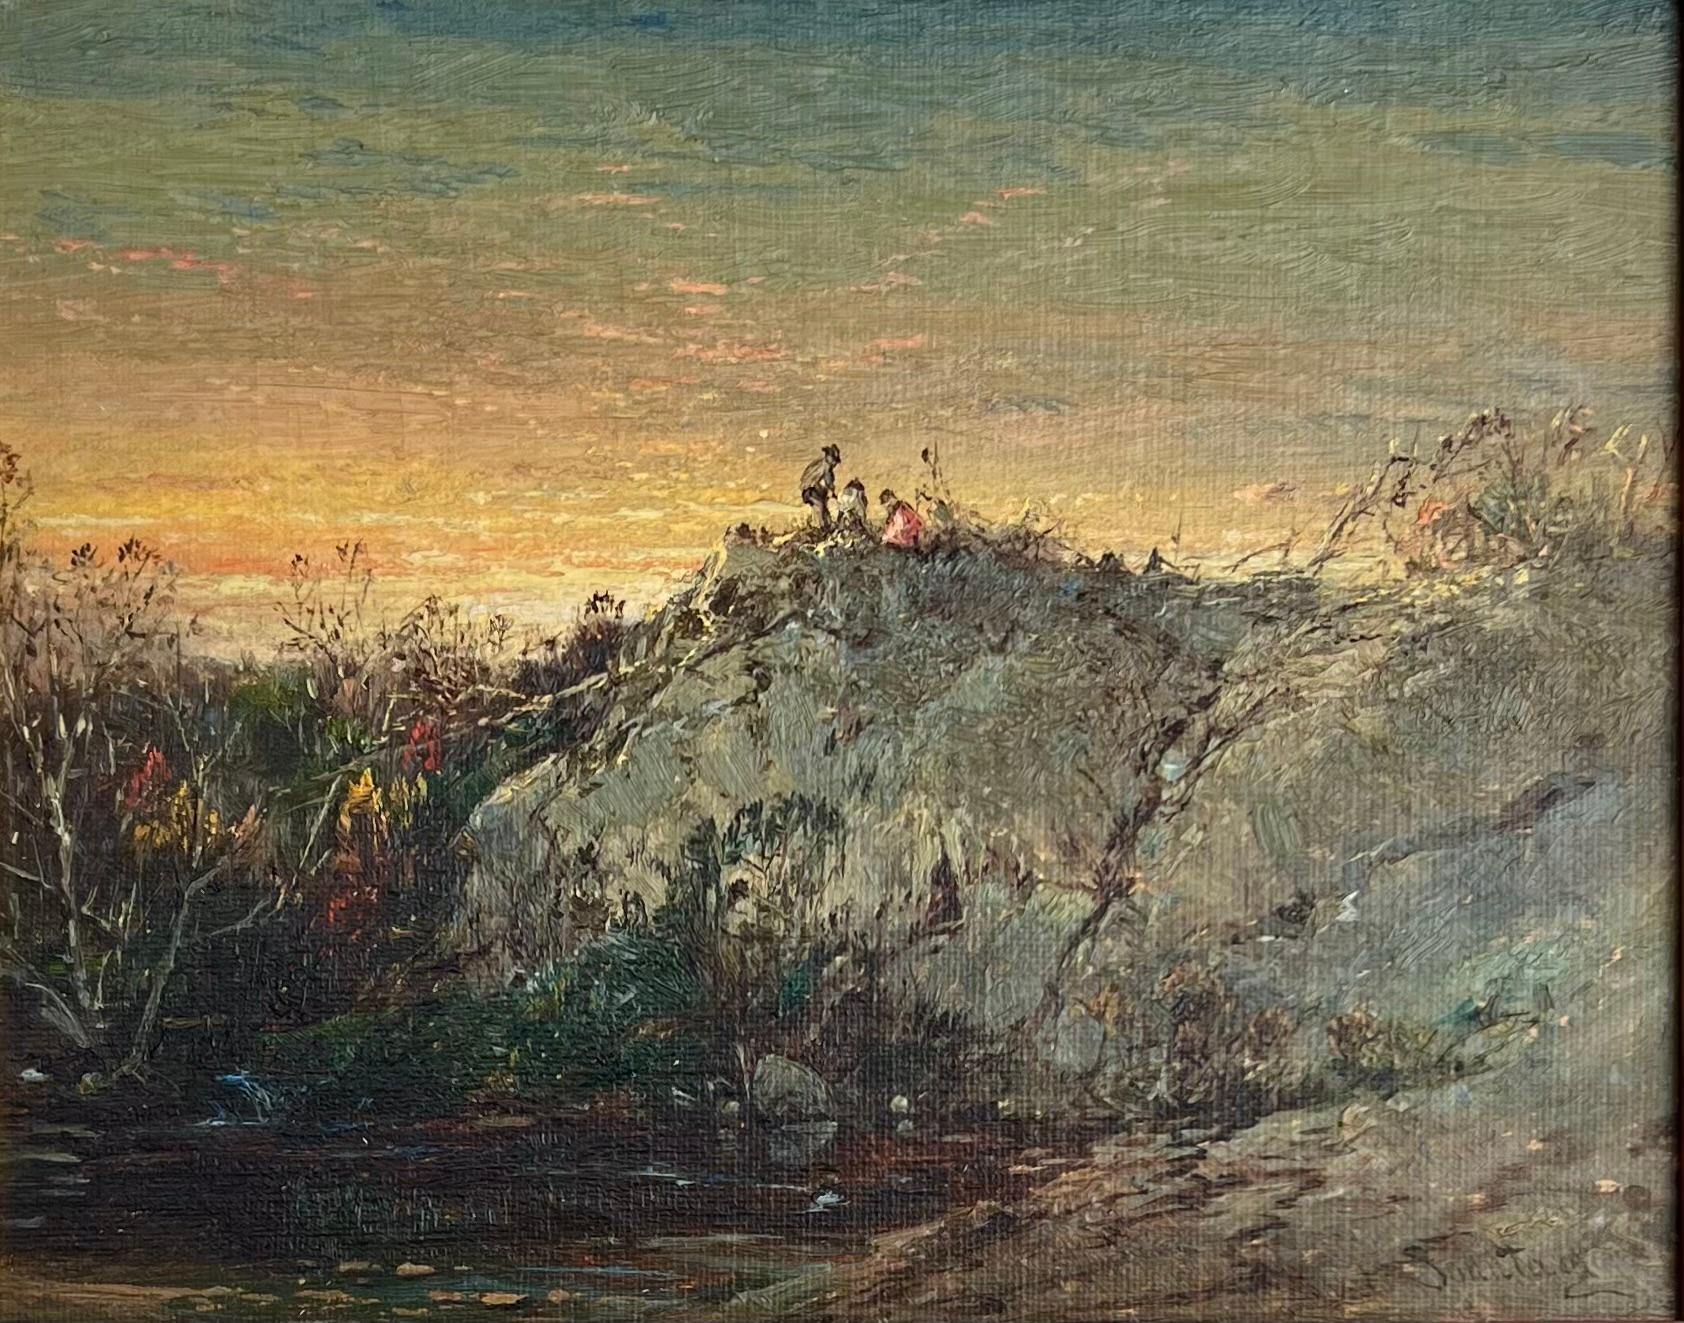 Twilight in the Hills - Painting by William Louis Sonntag Sr.